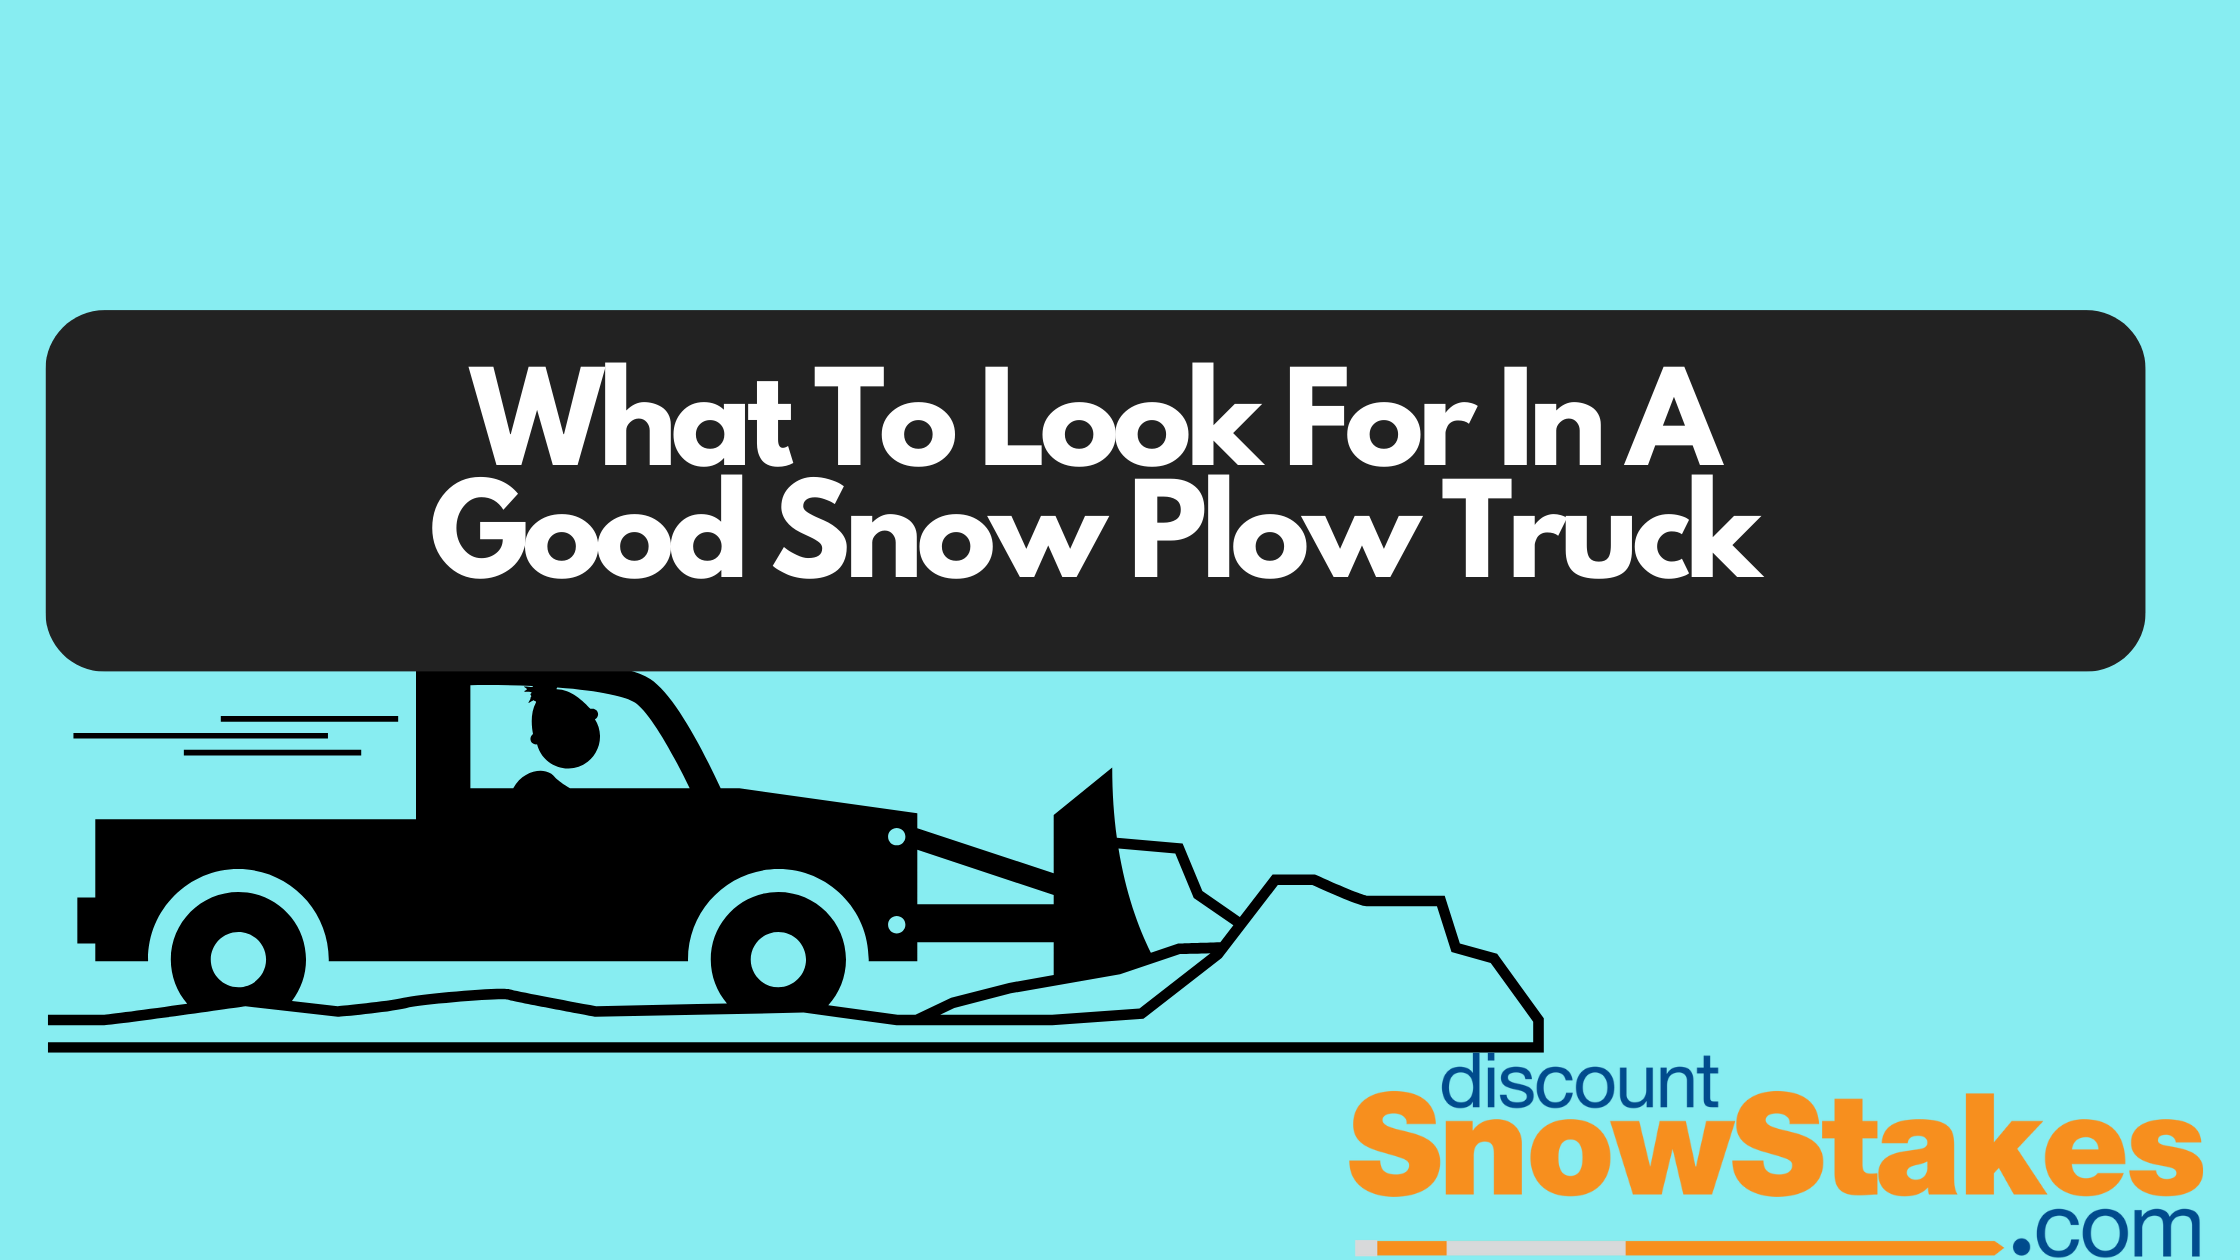 What Makes The Best Snow Plow Truck?